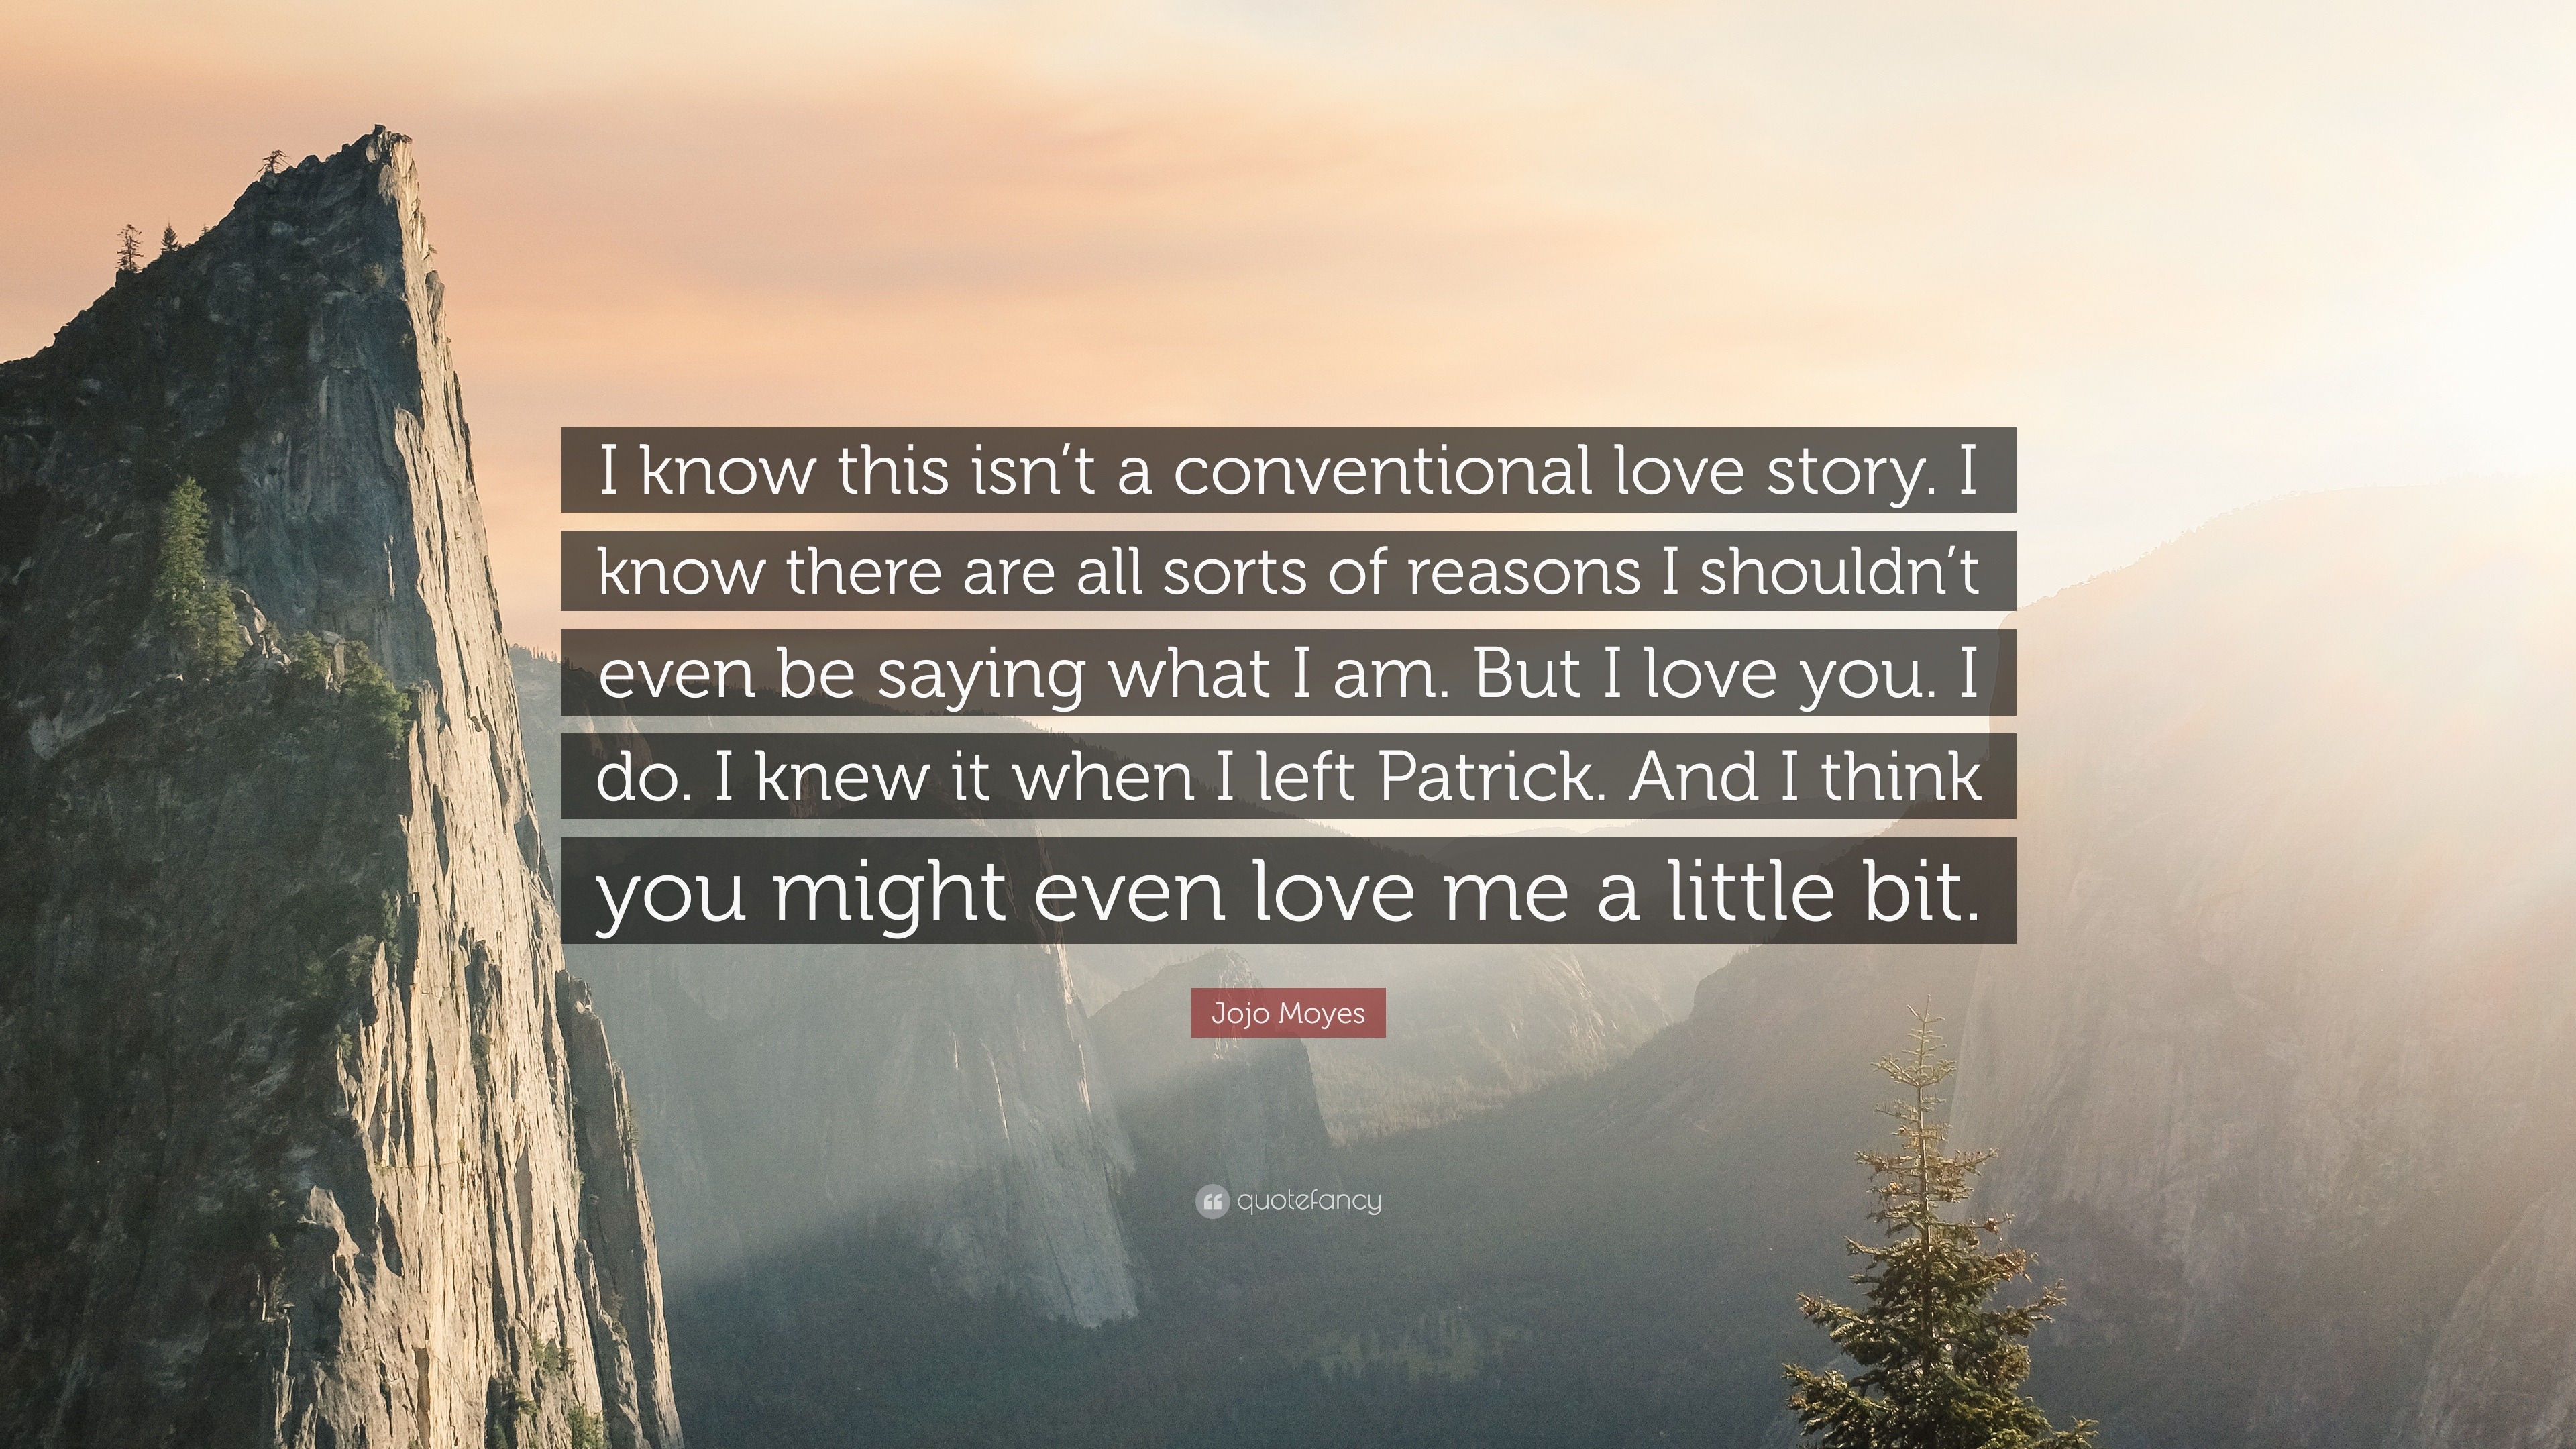 Jojo Moyes Quote “I know this isn t a conventional love story